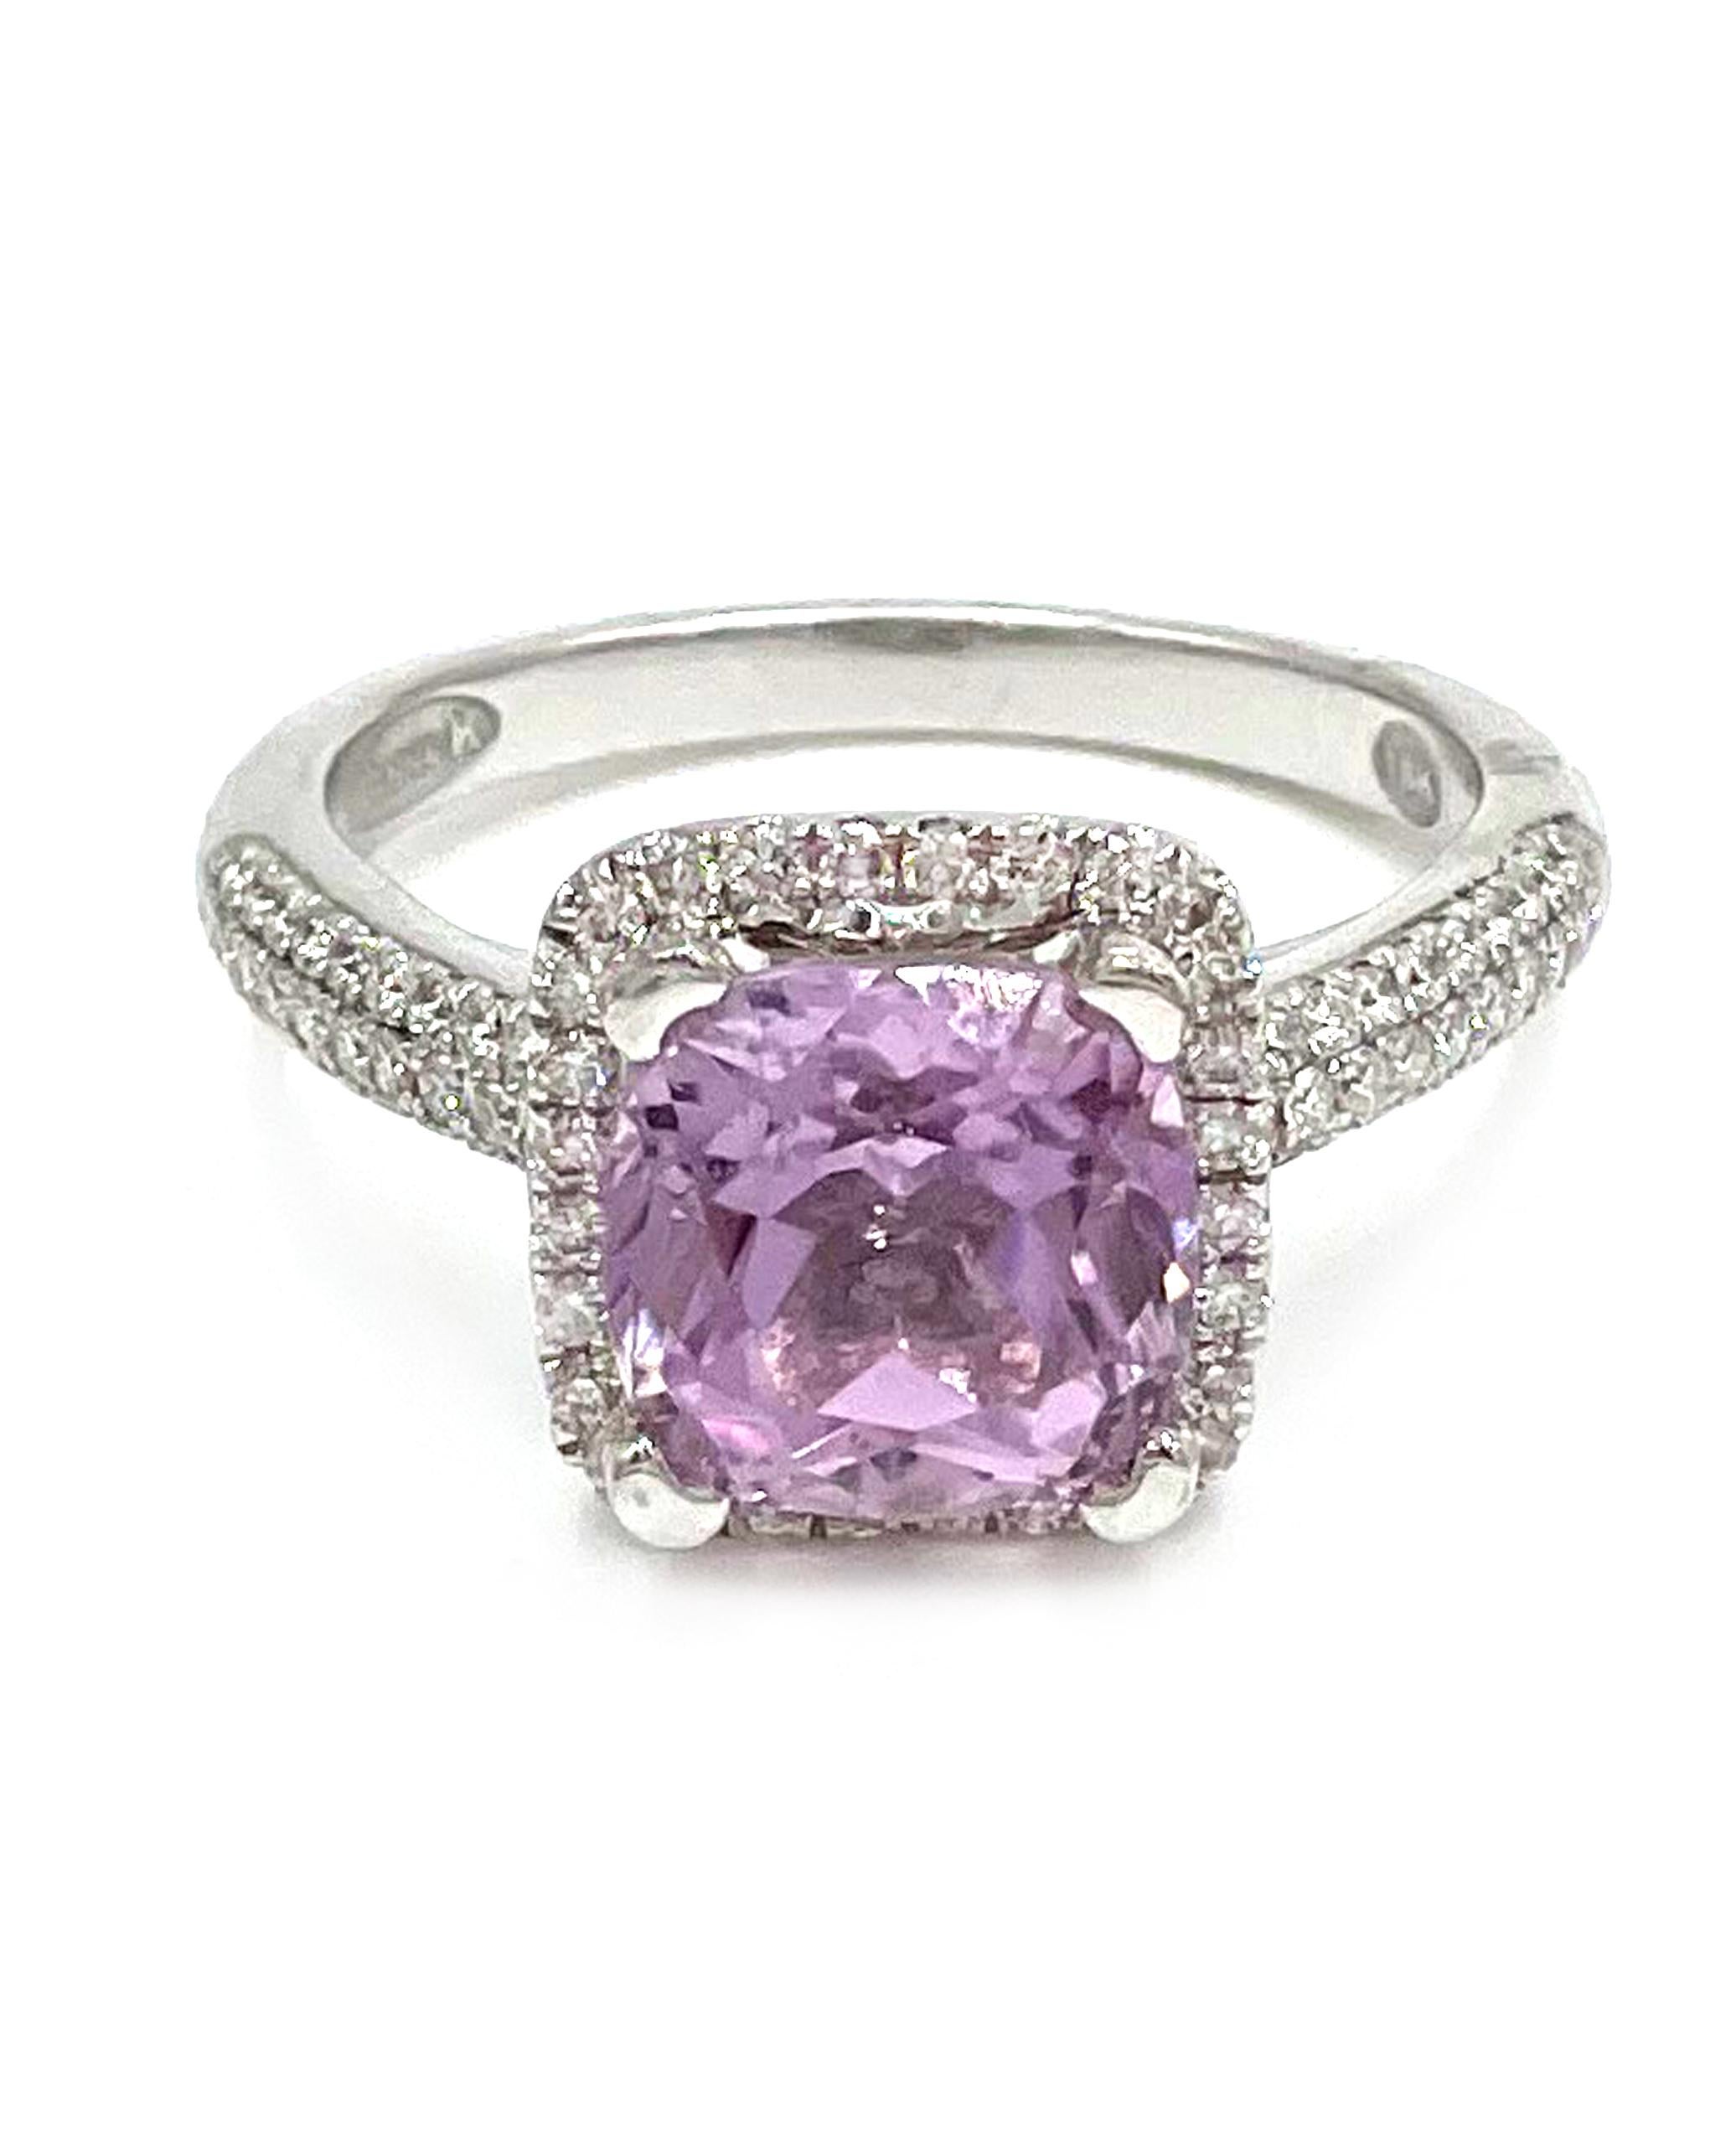 Vanna K 18K white gold engagement ring with 106 micro pave set round diamonds totaling 0.54 carats (G/H color, VS2/SI1 clarity). Center one cushion shape kunzite measuring 8.33X8.36mm.

* Size 6.5